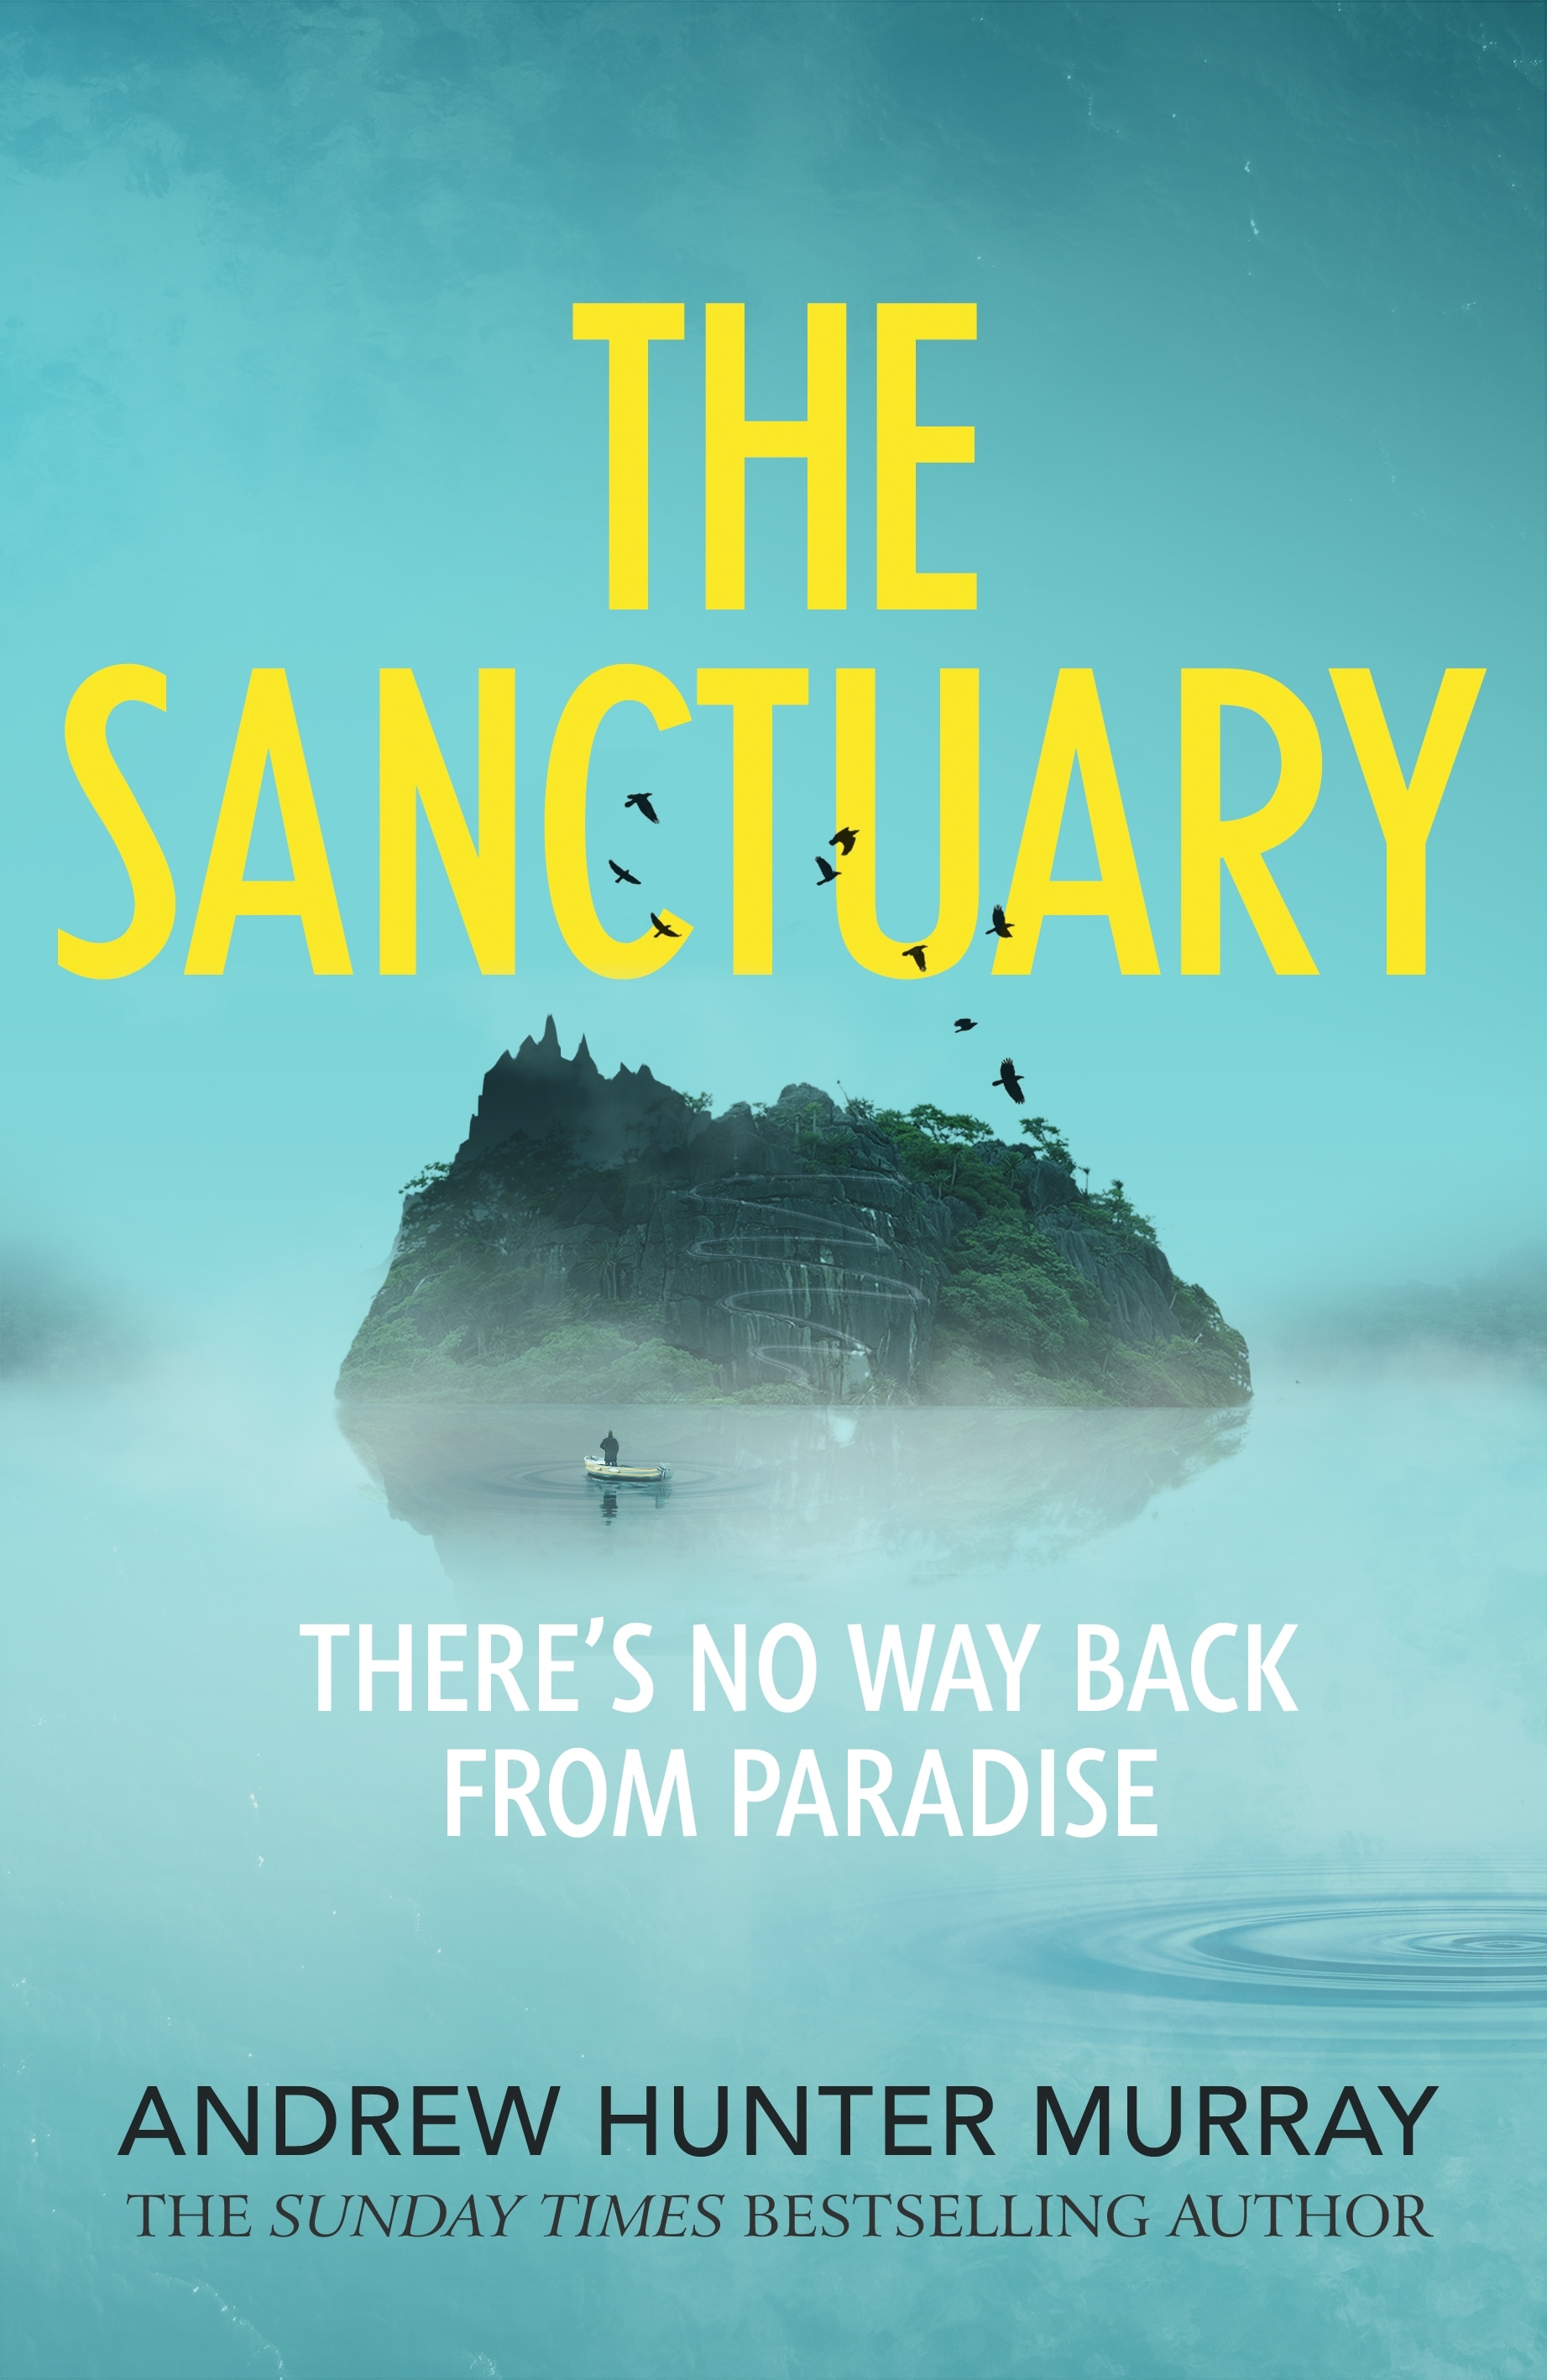 Book “The Sanctuary” by Andrew Hunter Murray — May 26, 2022